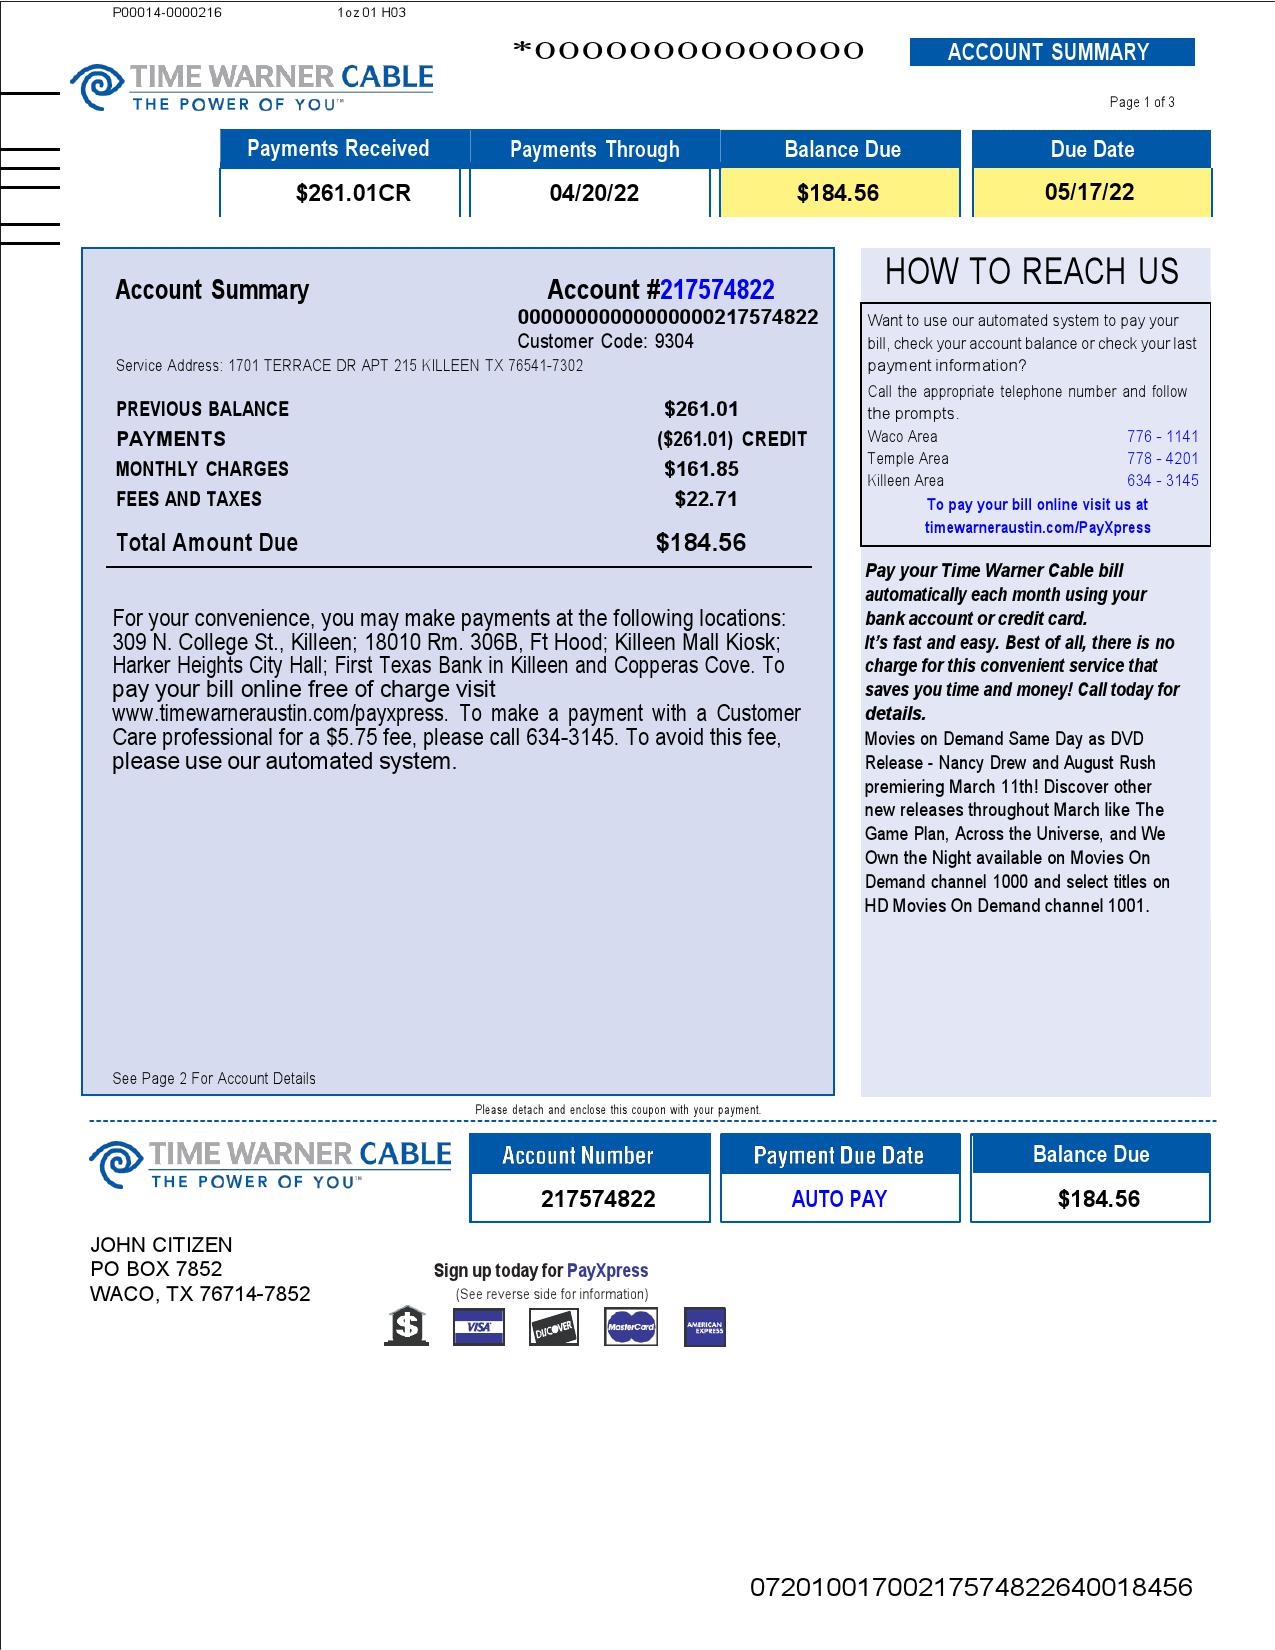 USA Time Warner Cabel utility bill, Word and PDF template, 3 pages